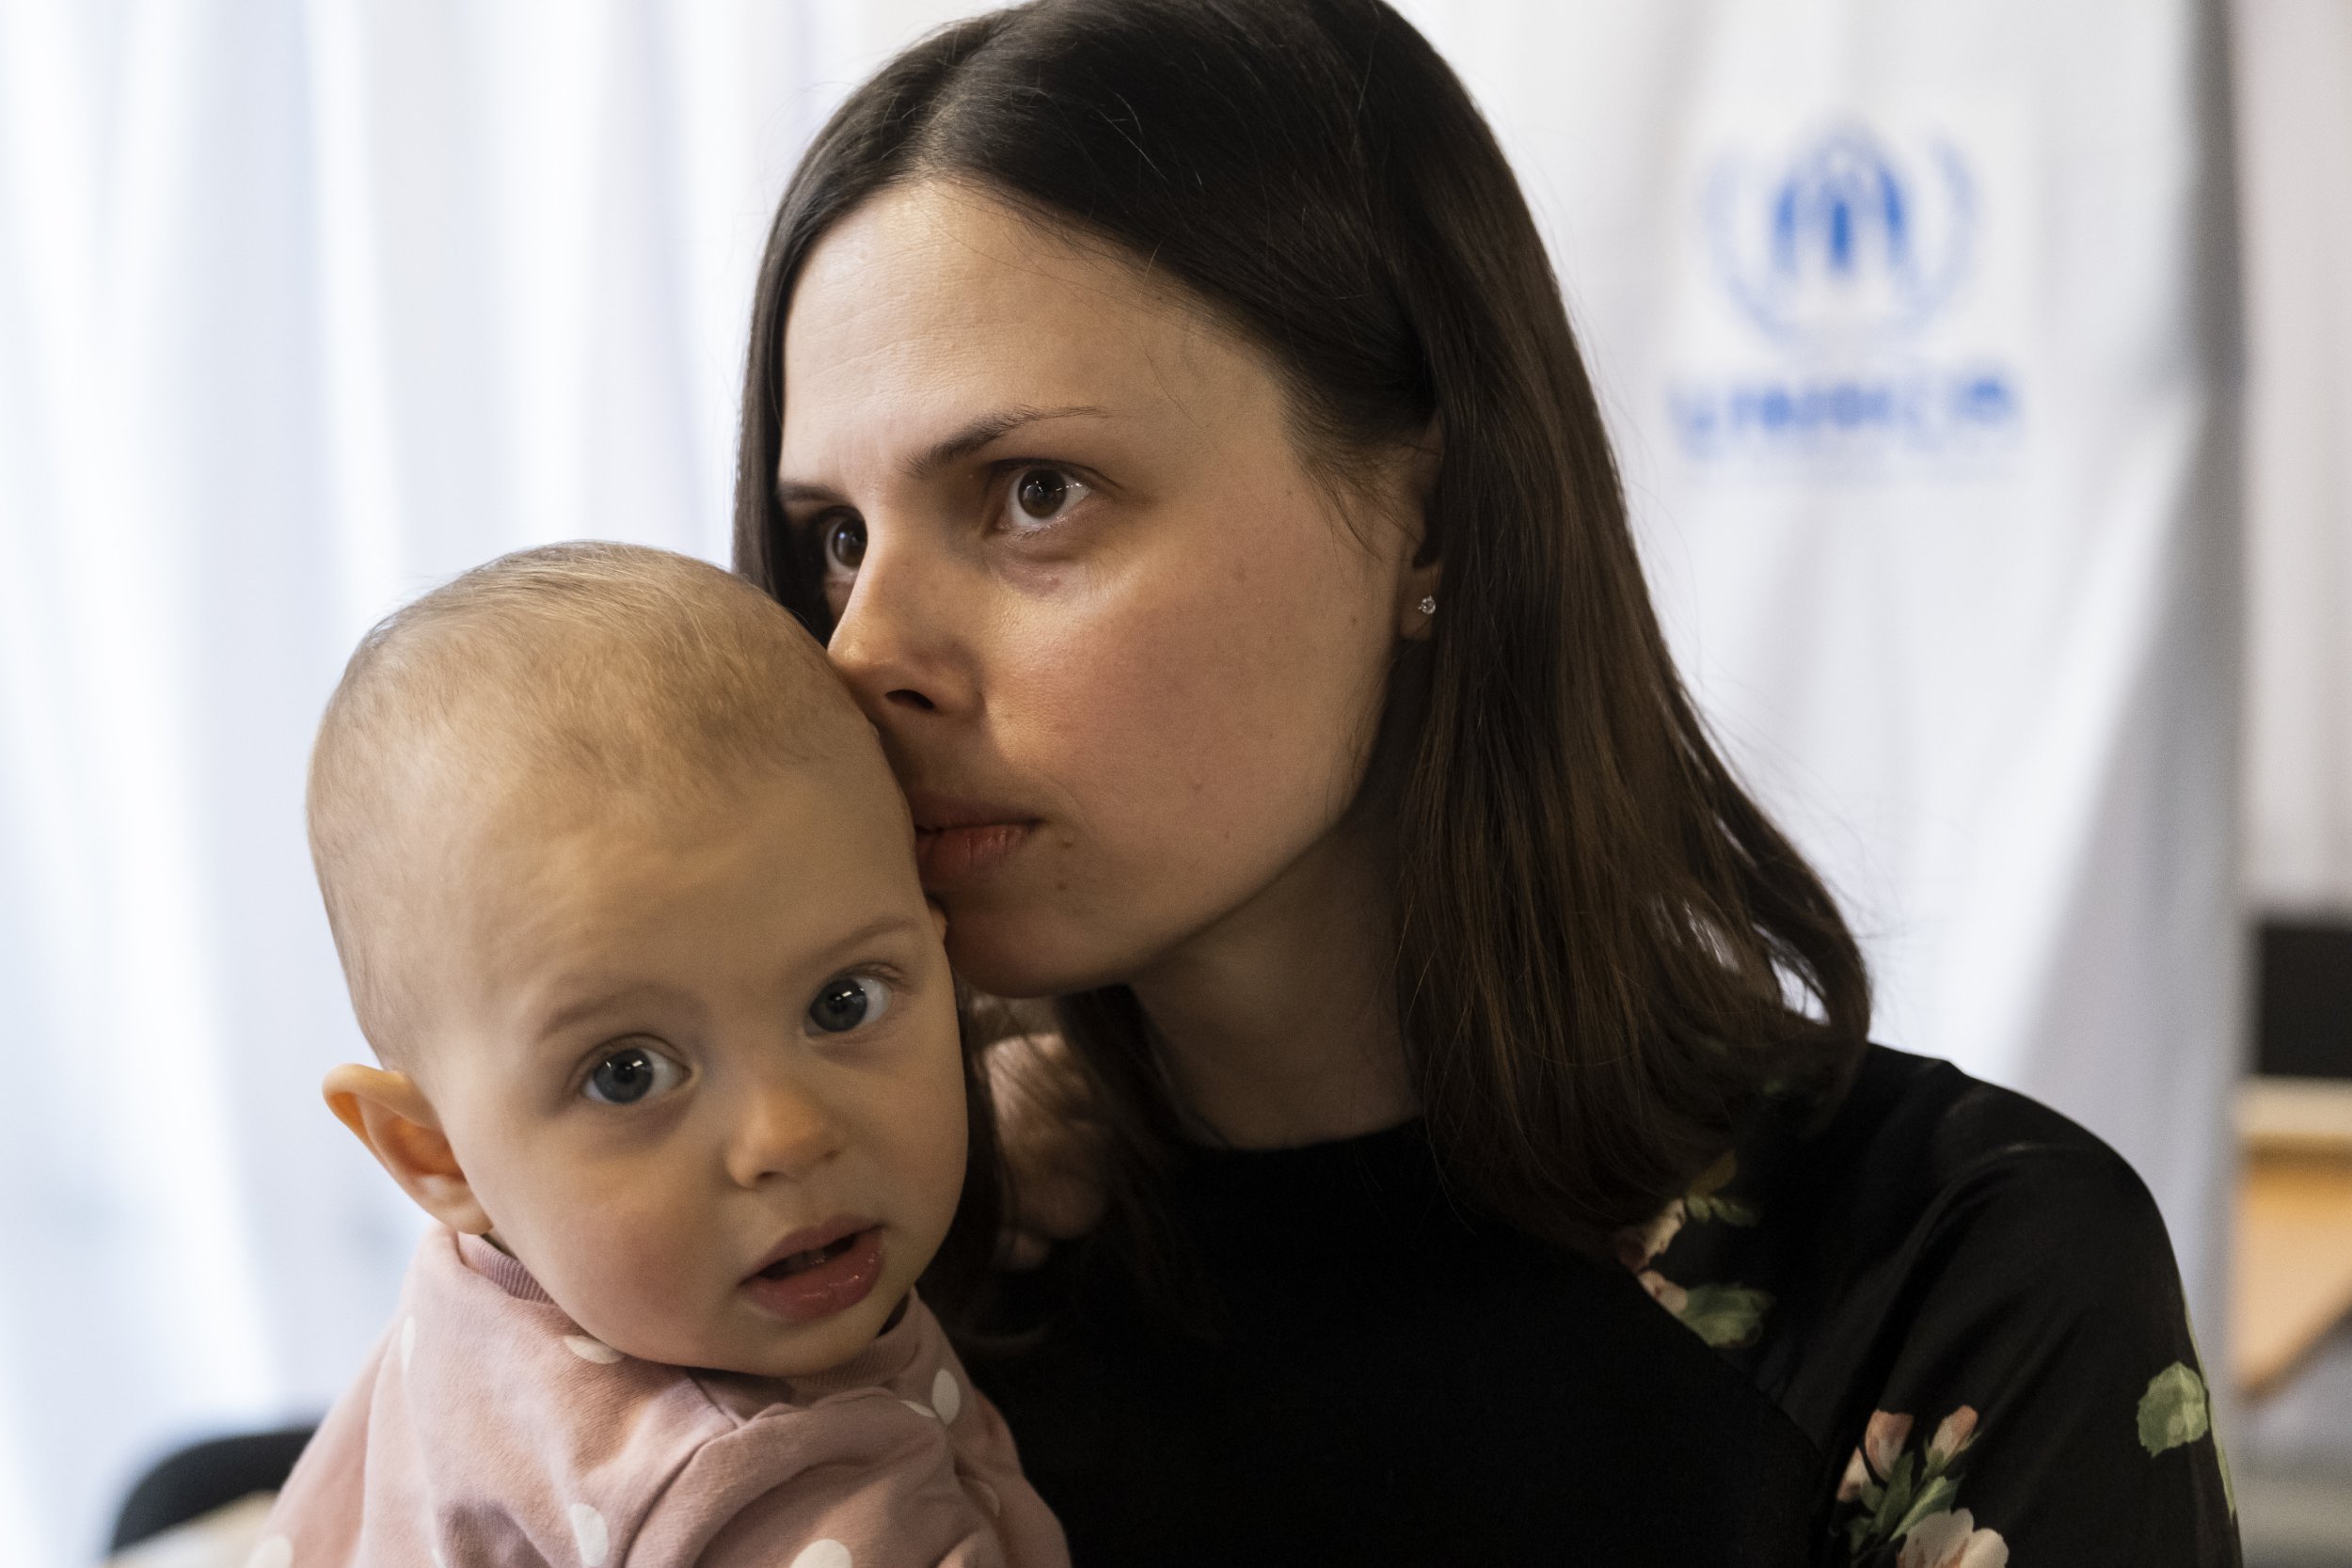 ‘We think about home everyday’: On the ground with Ukraine’s refugees